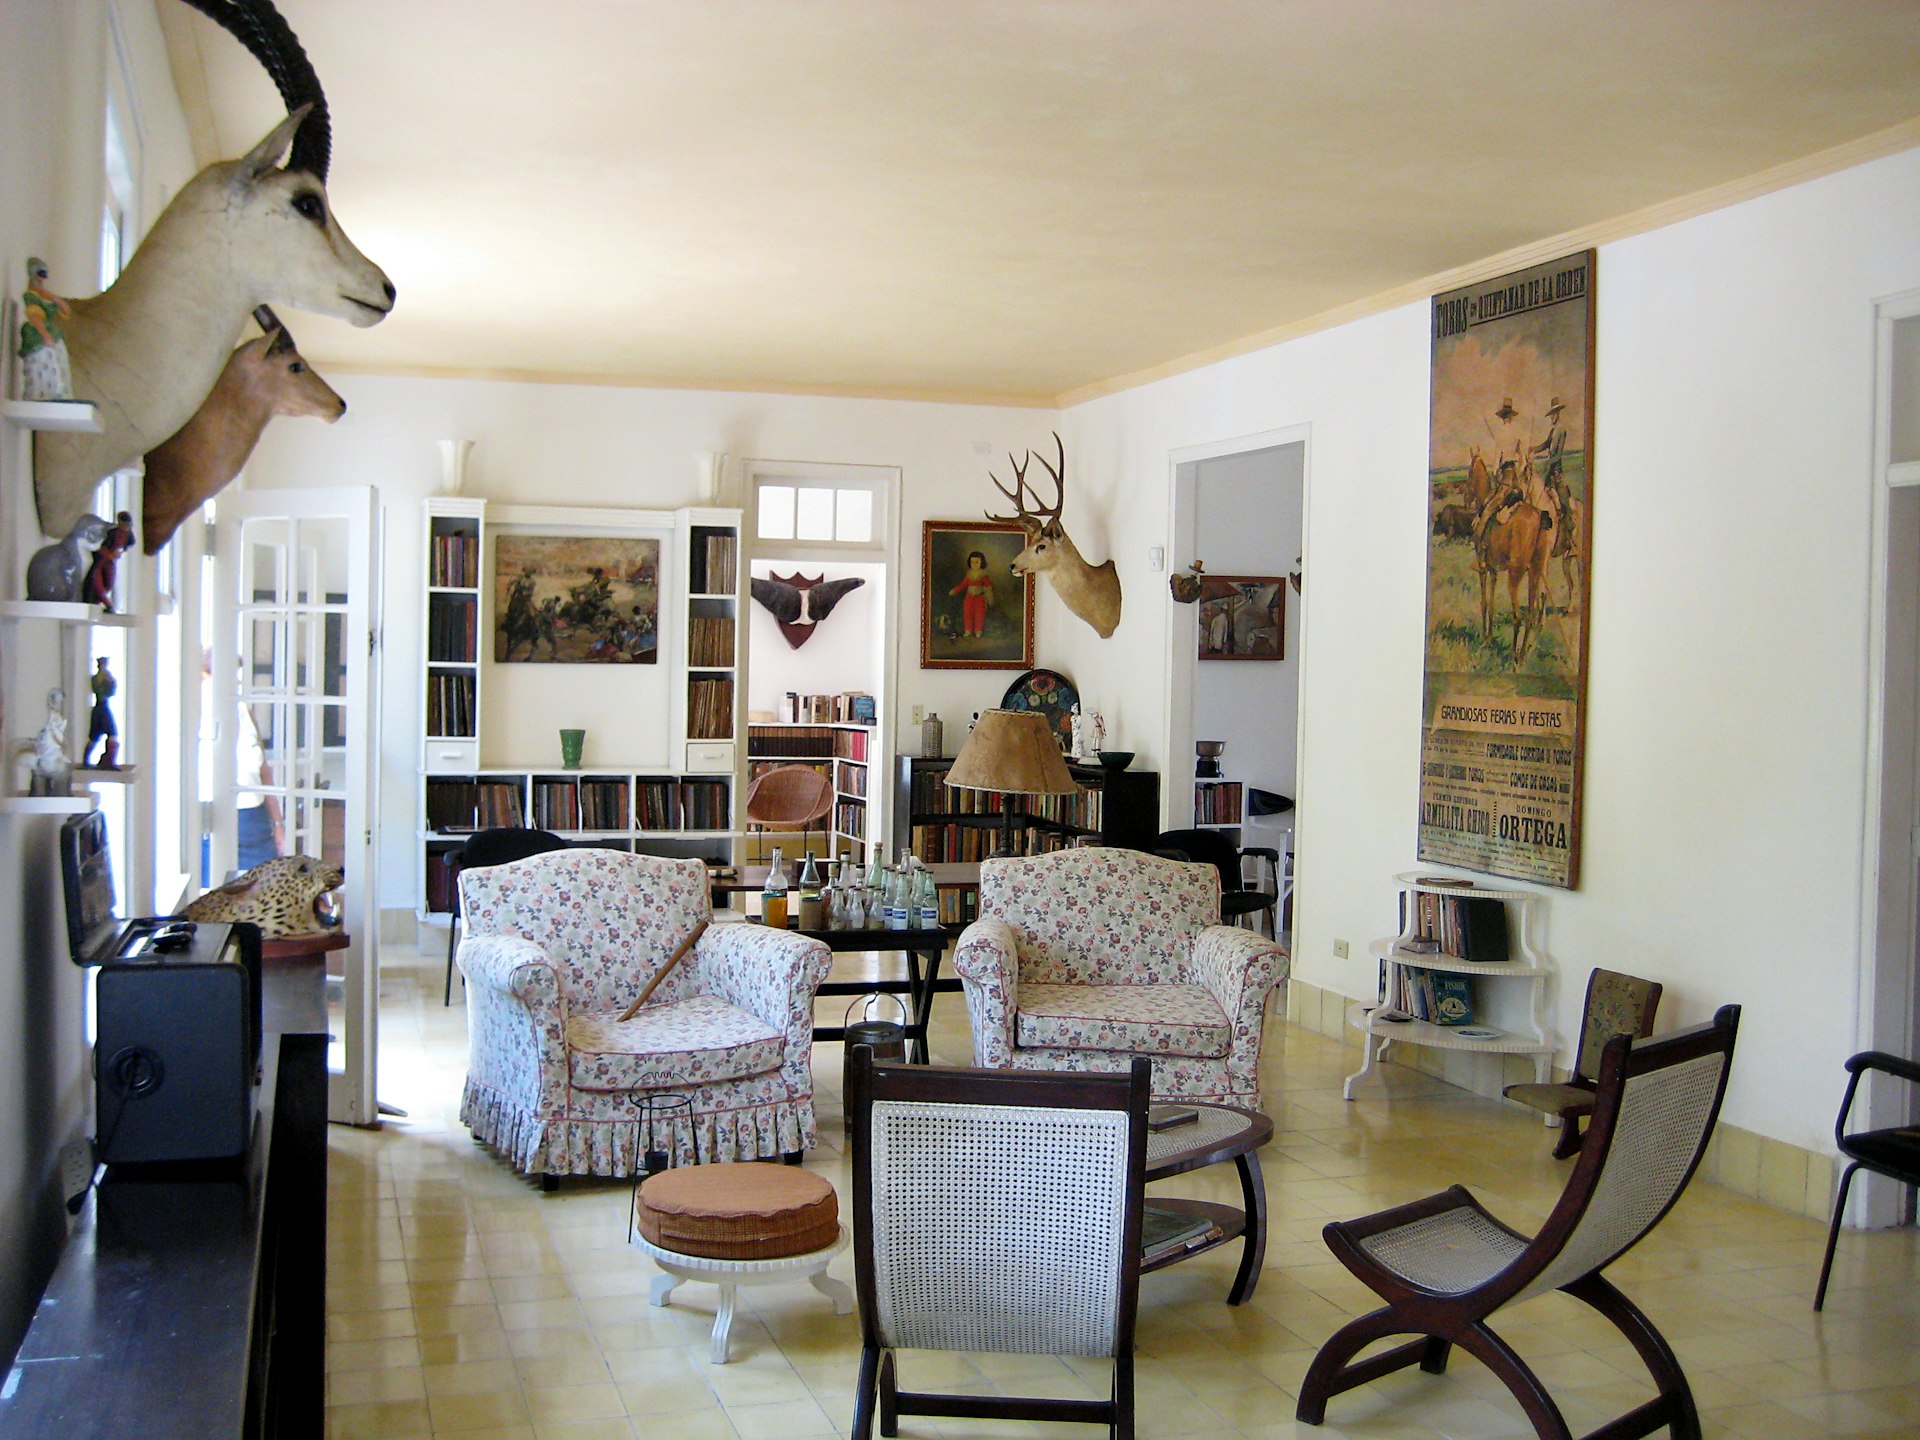 The interior of Ernest Hemingway's house, or Finca Vigia, at the city of Havana. The house is now a museum. 